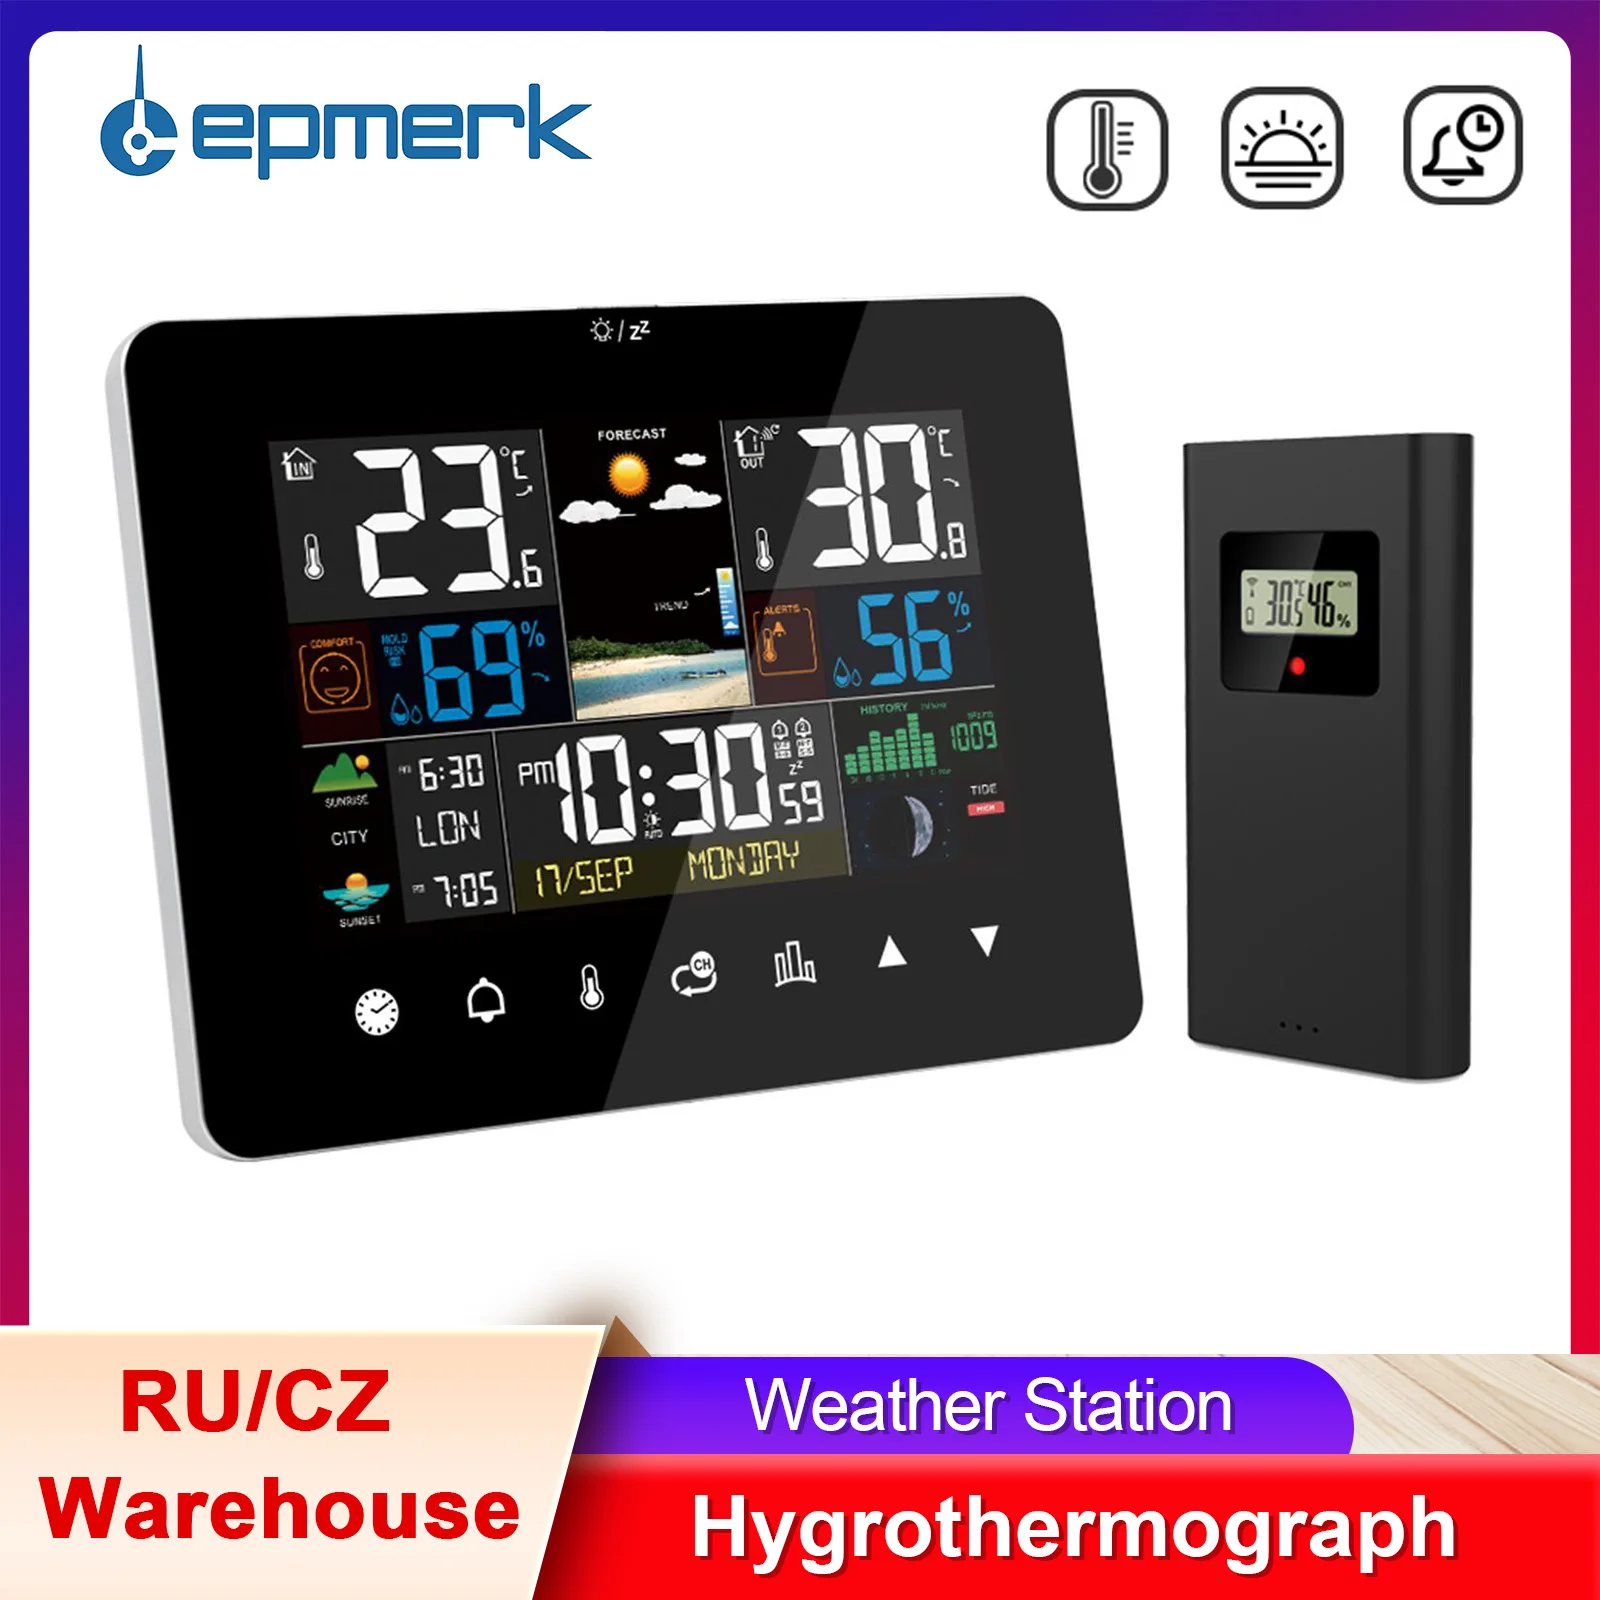 https://ae01.alicdn.com/kf/S5a11e8182b7b4affa0198a31a2752567s/Lepmerk-Weather-Station-Multi-function-Alarm-Clock-Thermometer-Hygrometer-Touch-Screen-Operation-with-Wireless-Outdoor-Sensor.jpg